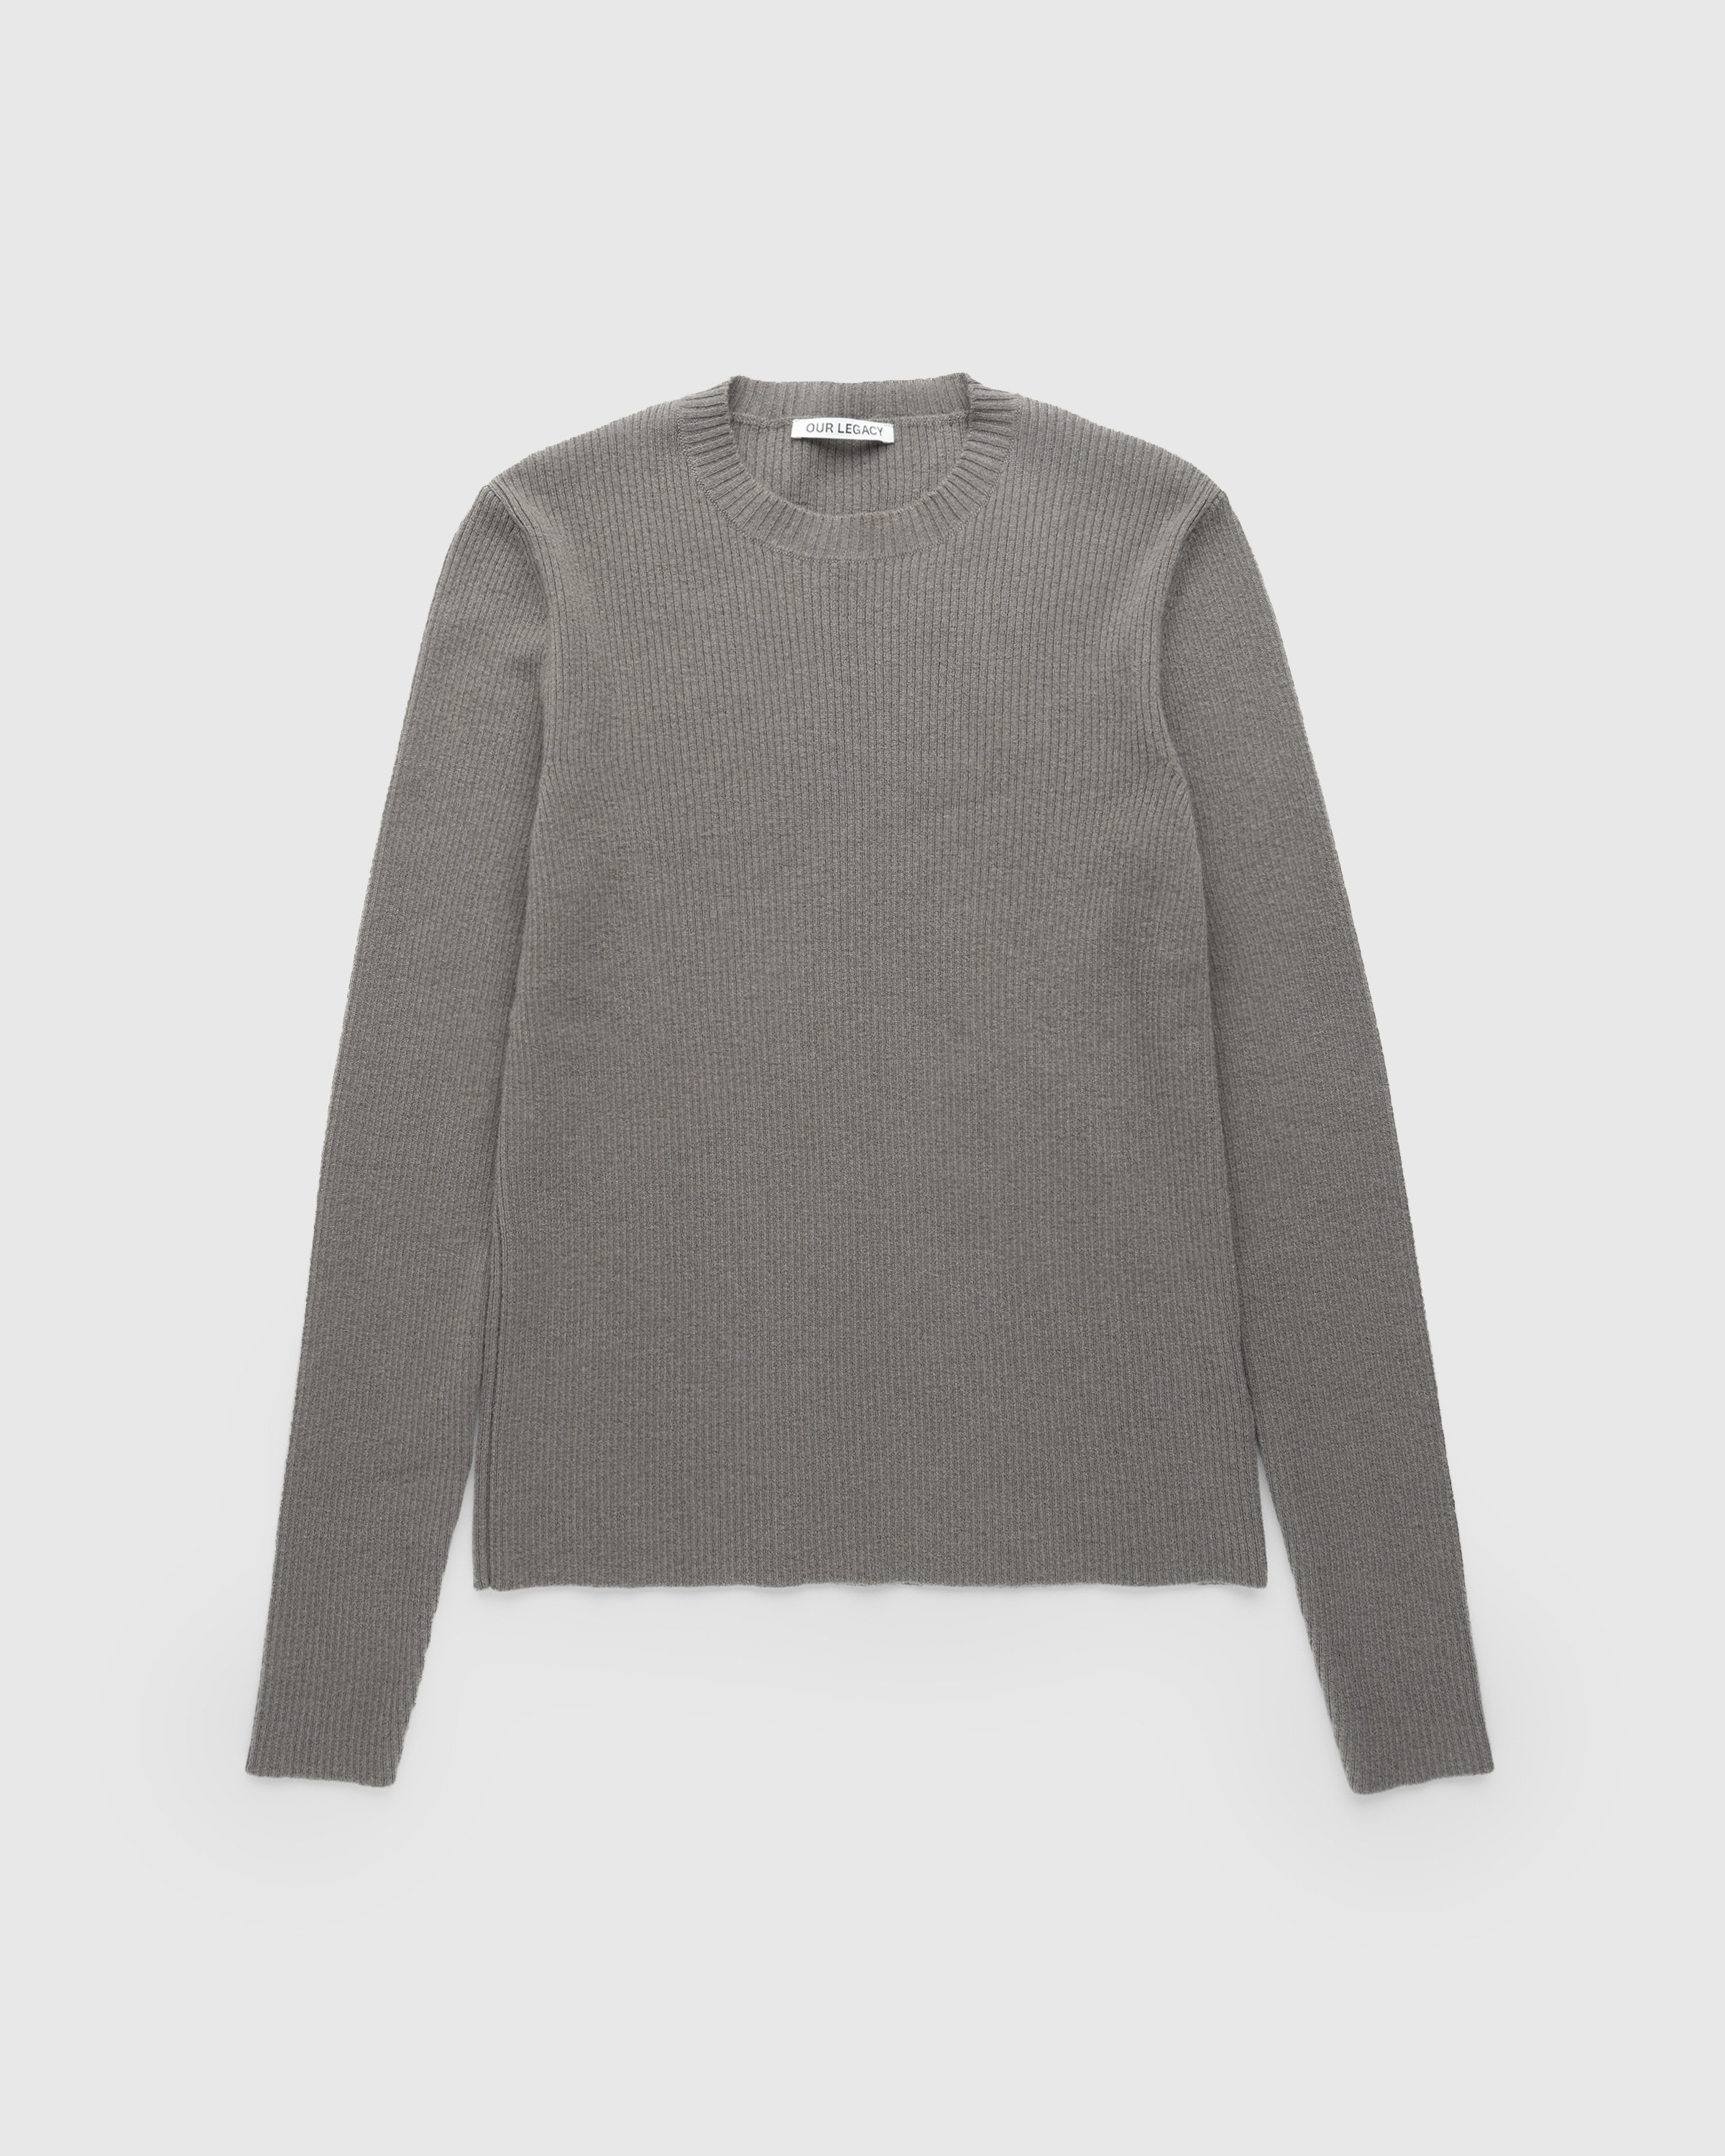 Our Legacy – Compact Roundneck Mole Grey Super Wool | Highsnobiety